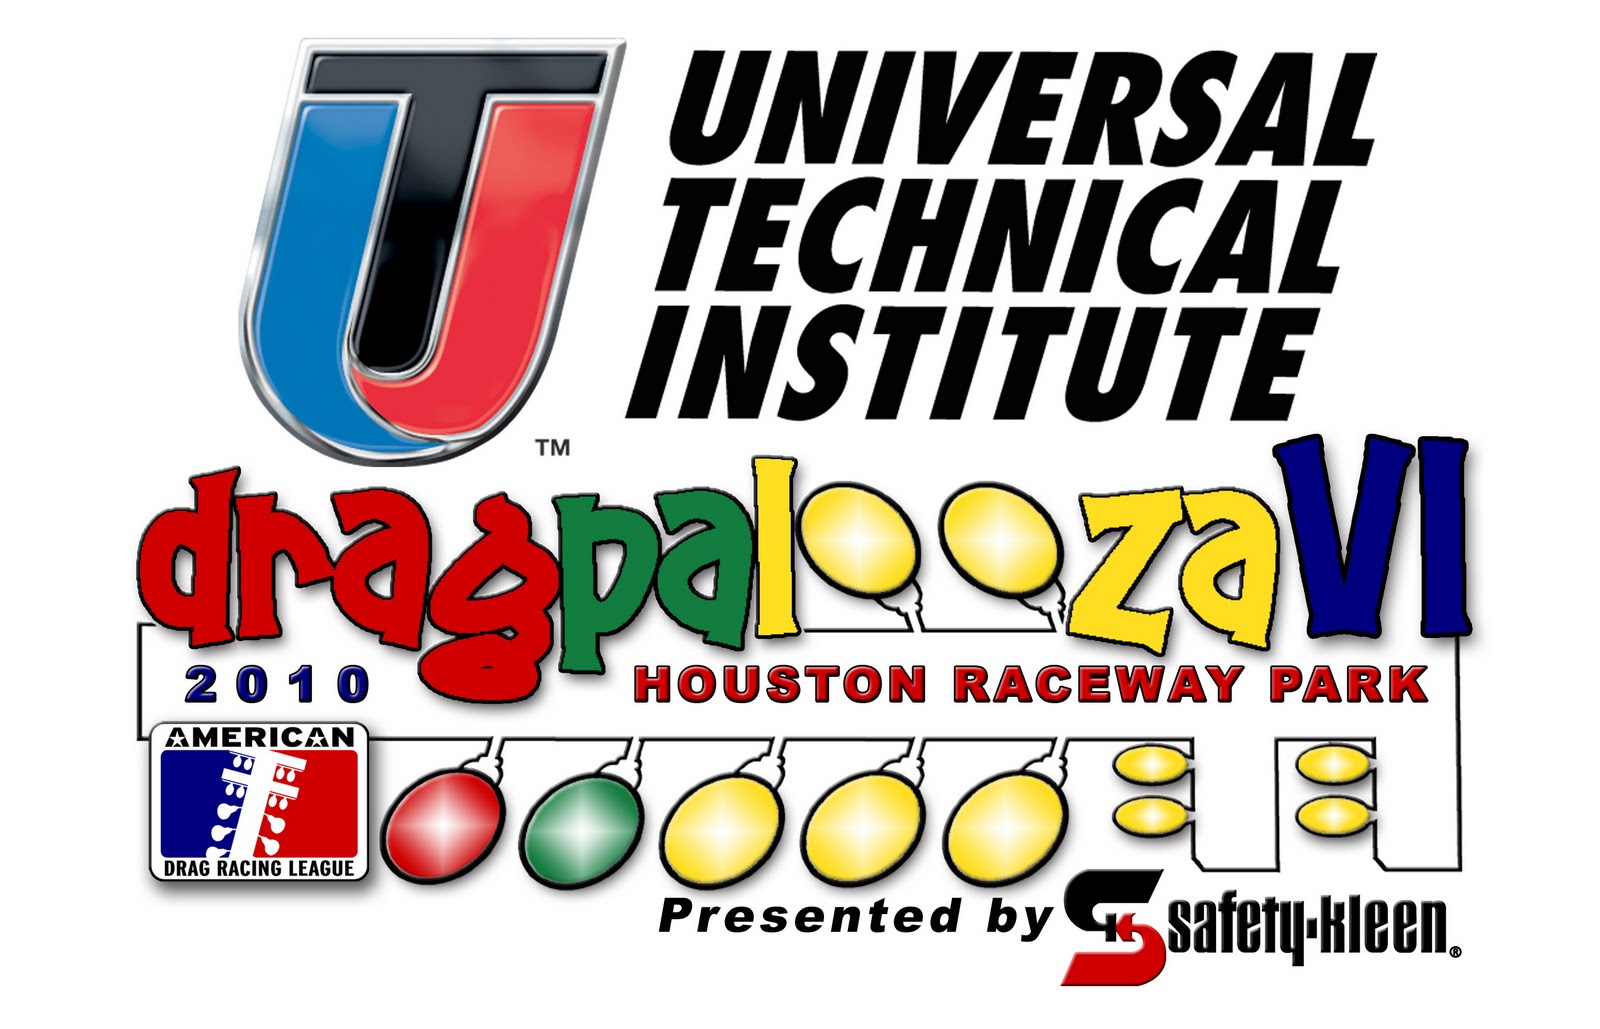 [2010+ADRL+Event+1+Universal+Technical+Institute+Dragpalooza+VI+Presented+by+Safety-Kleen_Logo-714010.jpg]